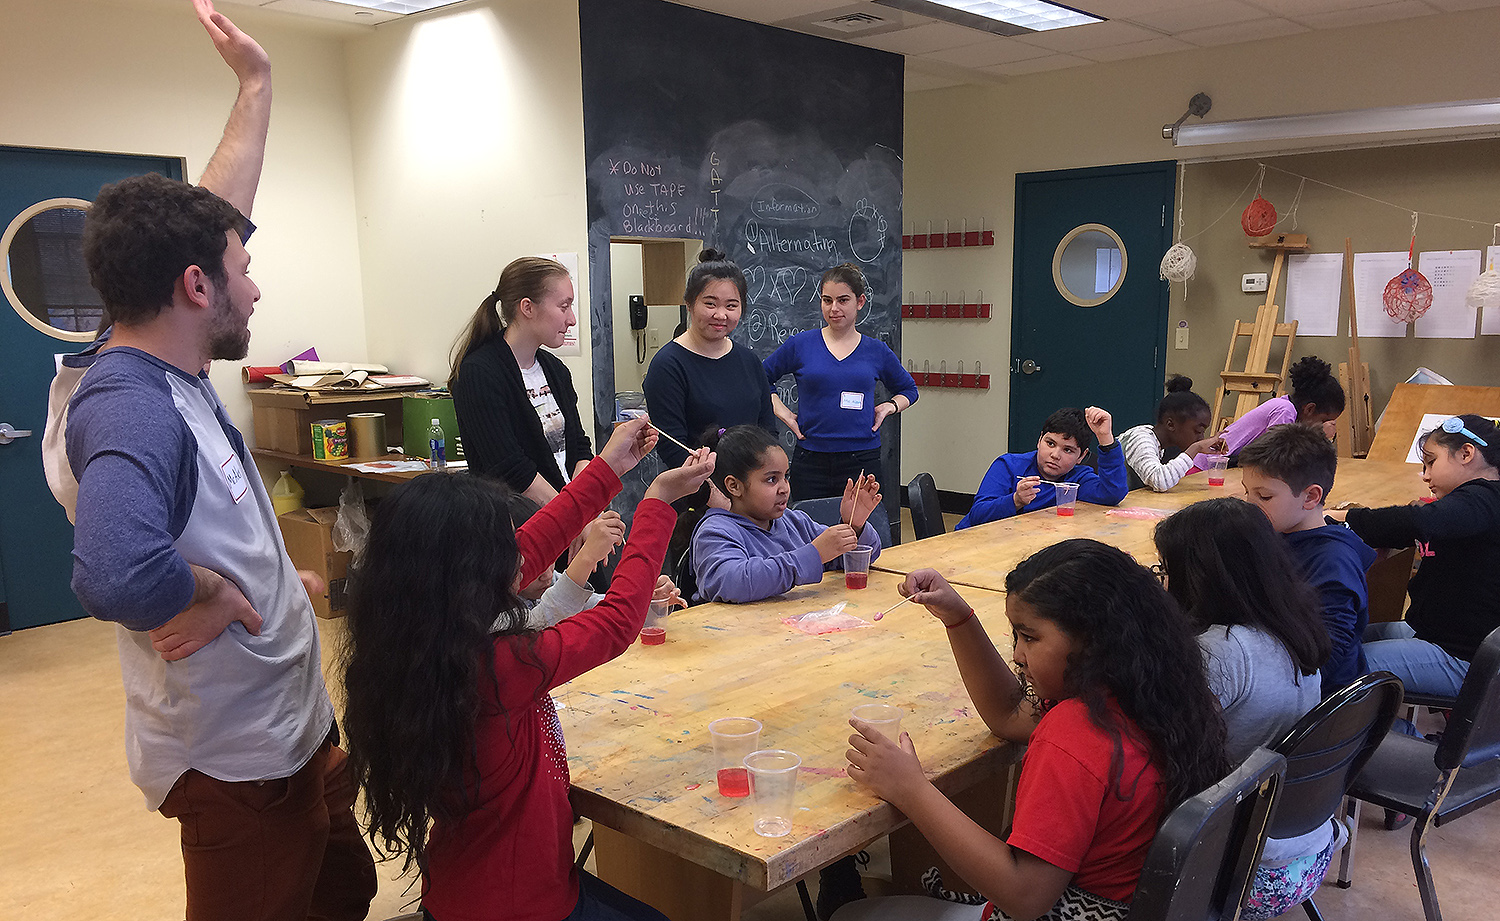 The Wesleyan students taught GSTLC's 1st-5th graders about basic molecular biology and then led them through a hands-on activity where the children extracted DNA from strawberries. 